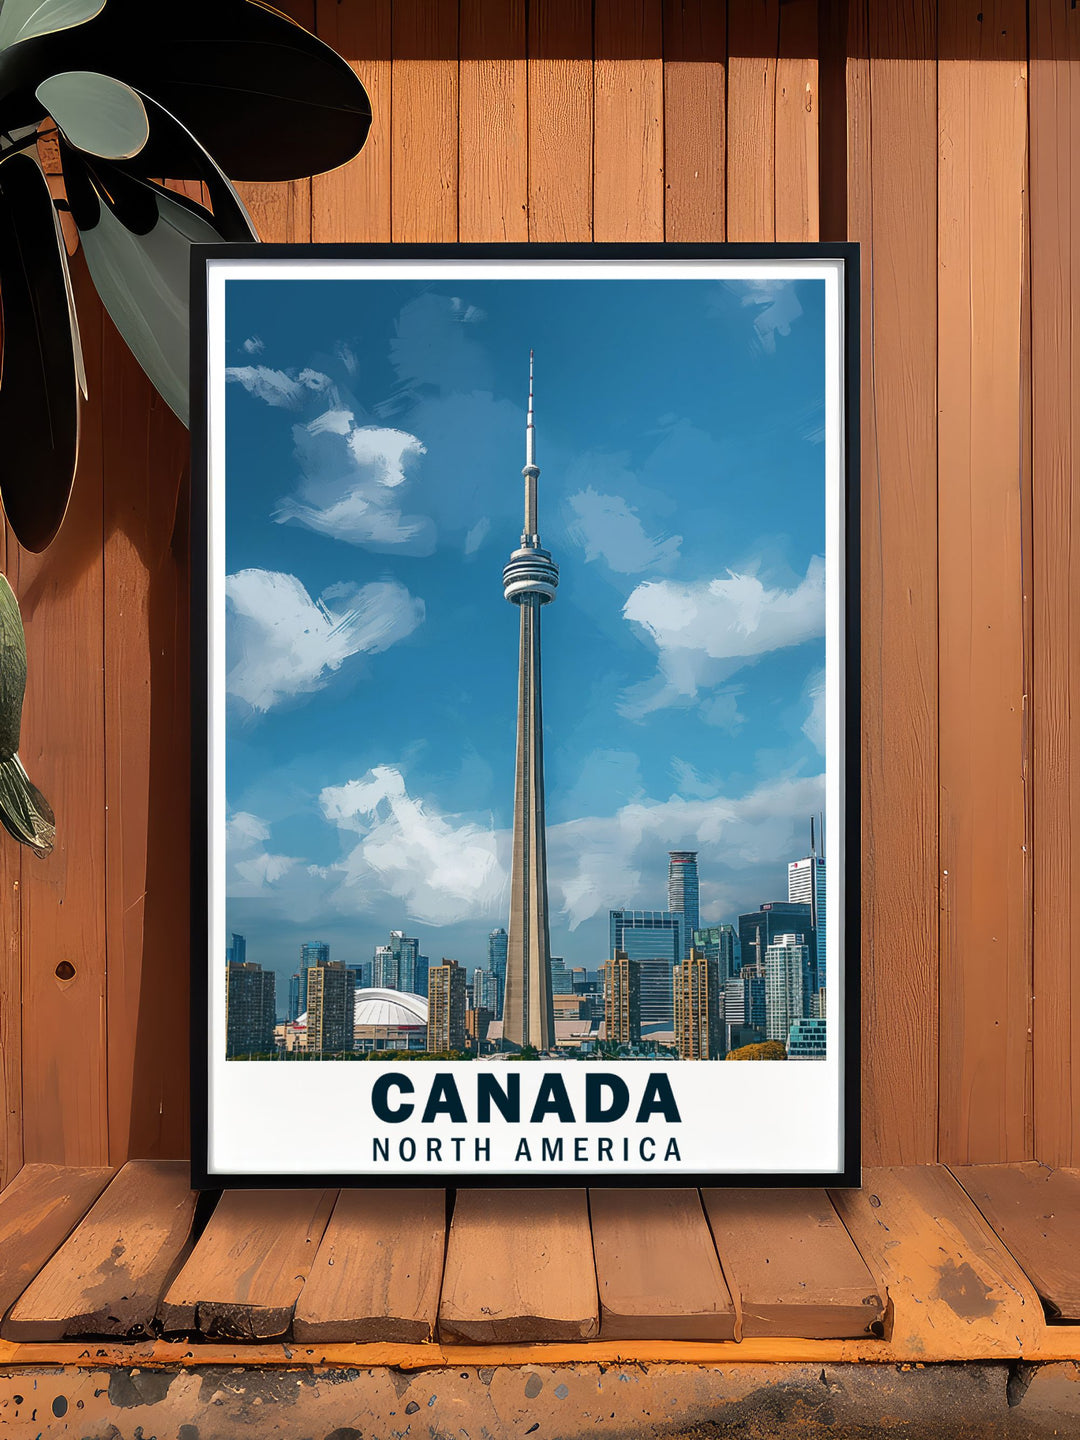 The picturesque scenery of Toronto with the CN Tower as the focal point is featured in this vibrant travel poster, perfect for adding Canada's unique charm to your home.